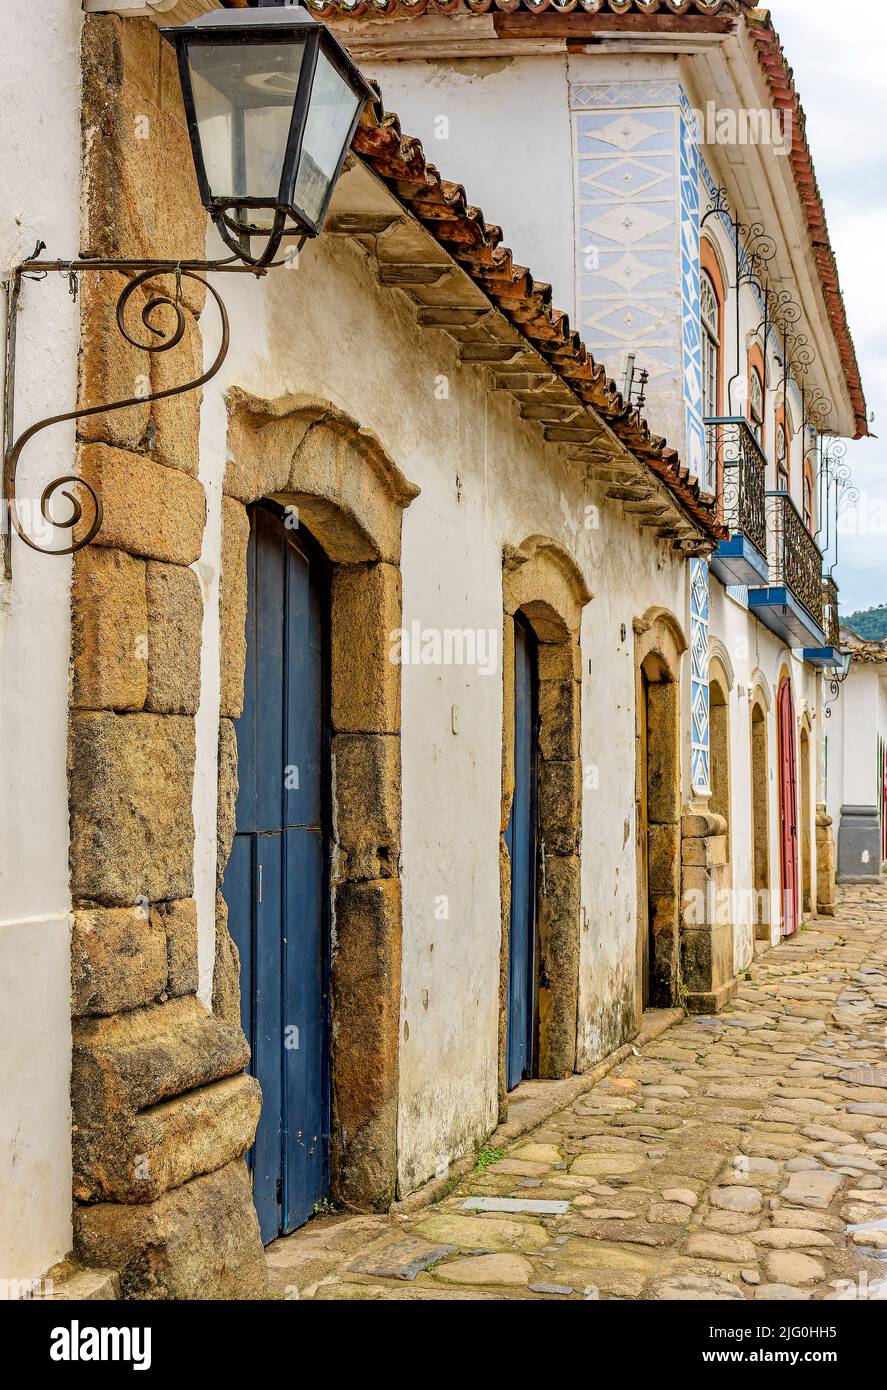 Facades of old colonial-style houses and cobblestone street in the historic city of Paraty on the south coast of Rio de Janeiro Stock Photo